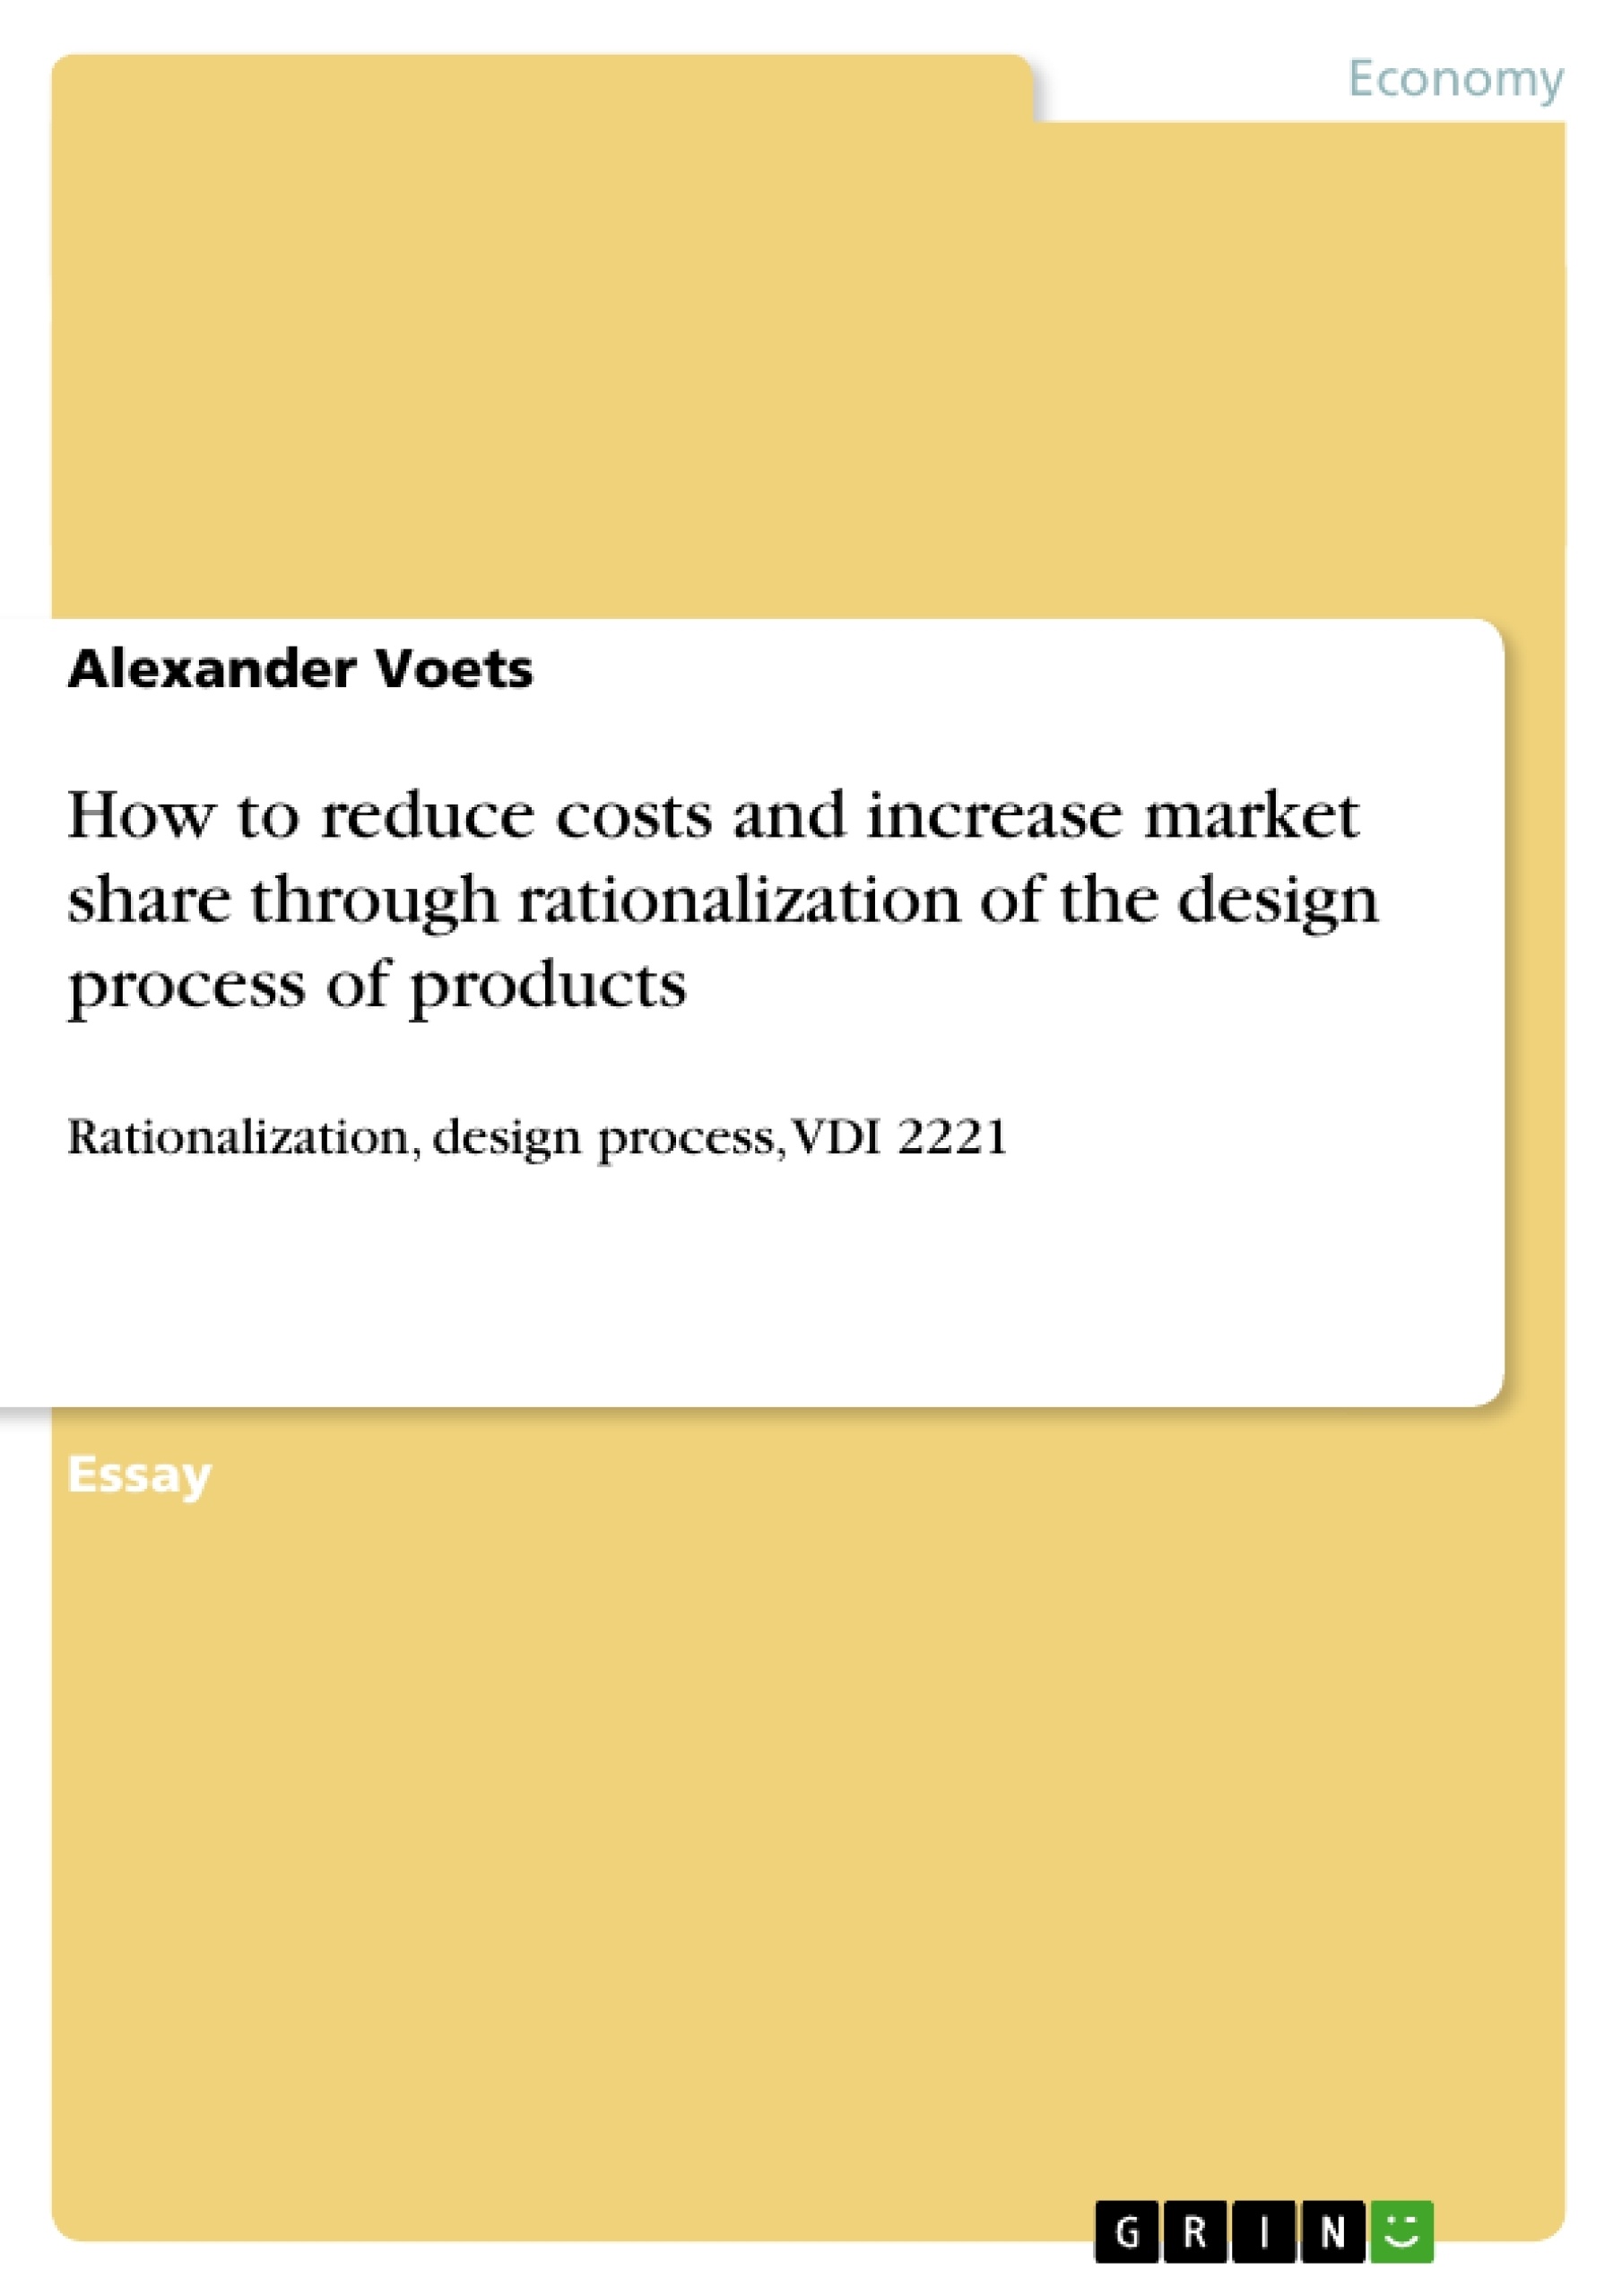 Title: How to reduce costs and increase market share through rationalization of the design process of products